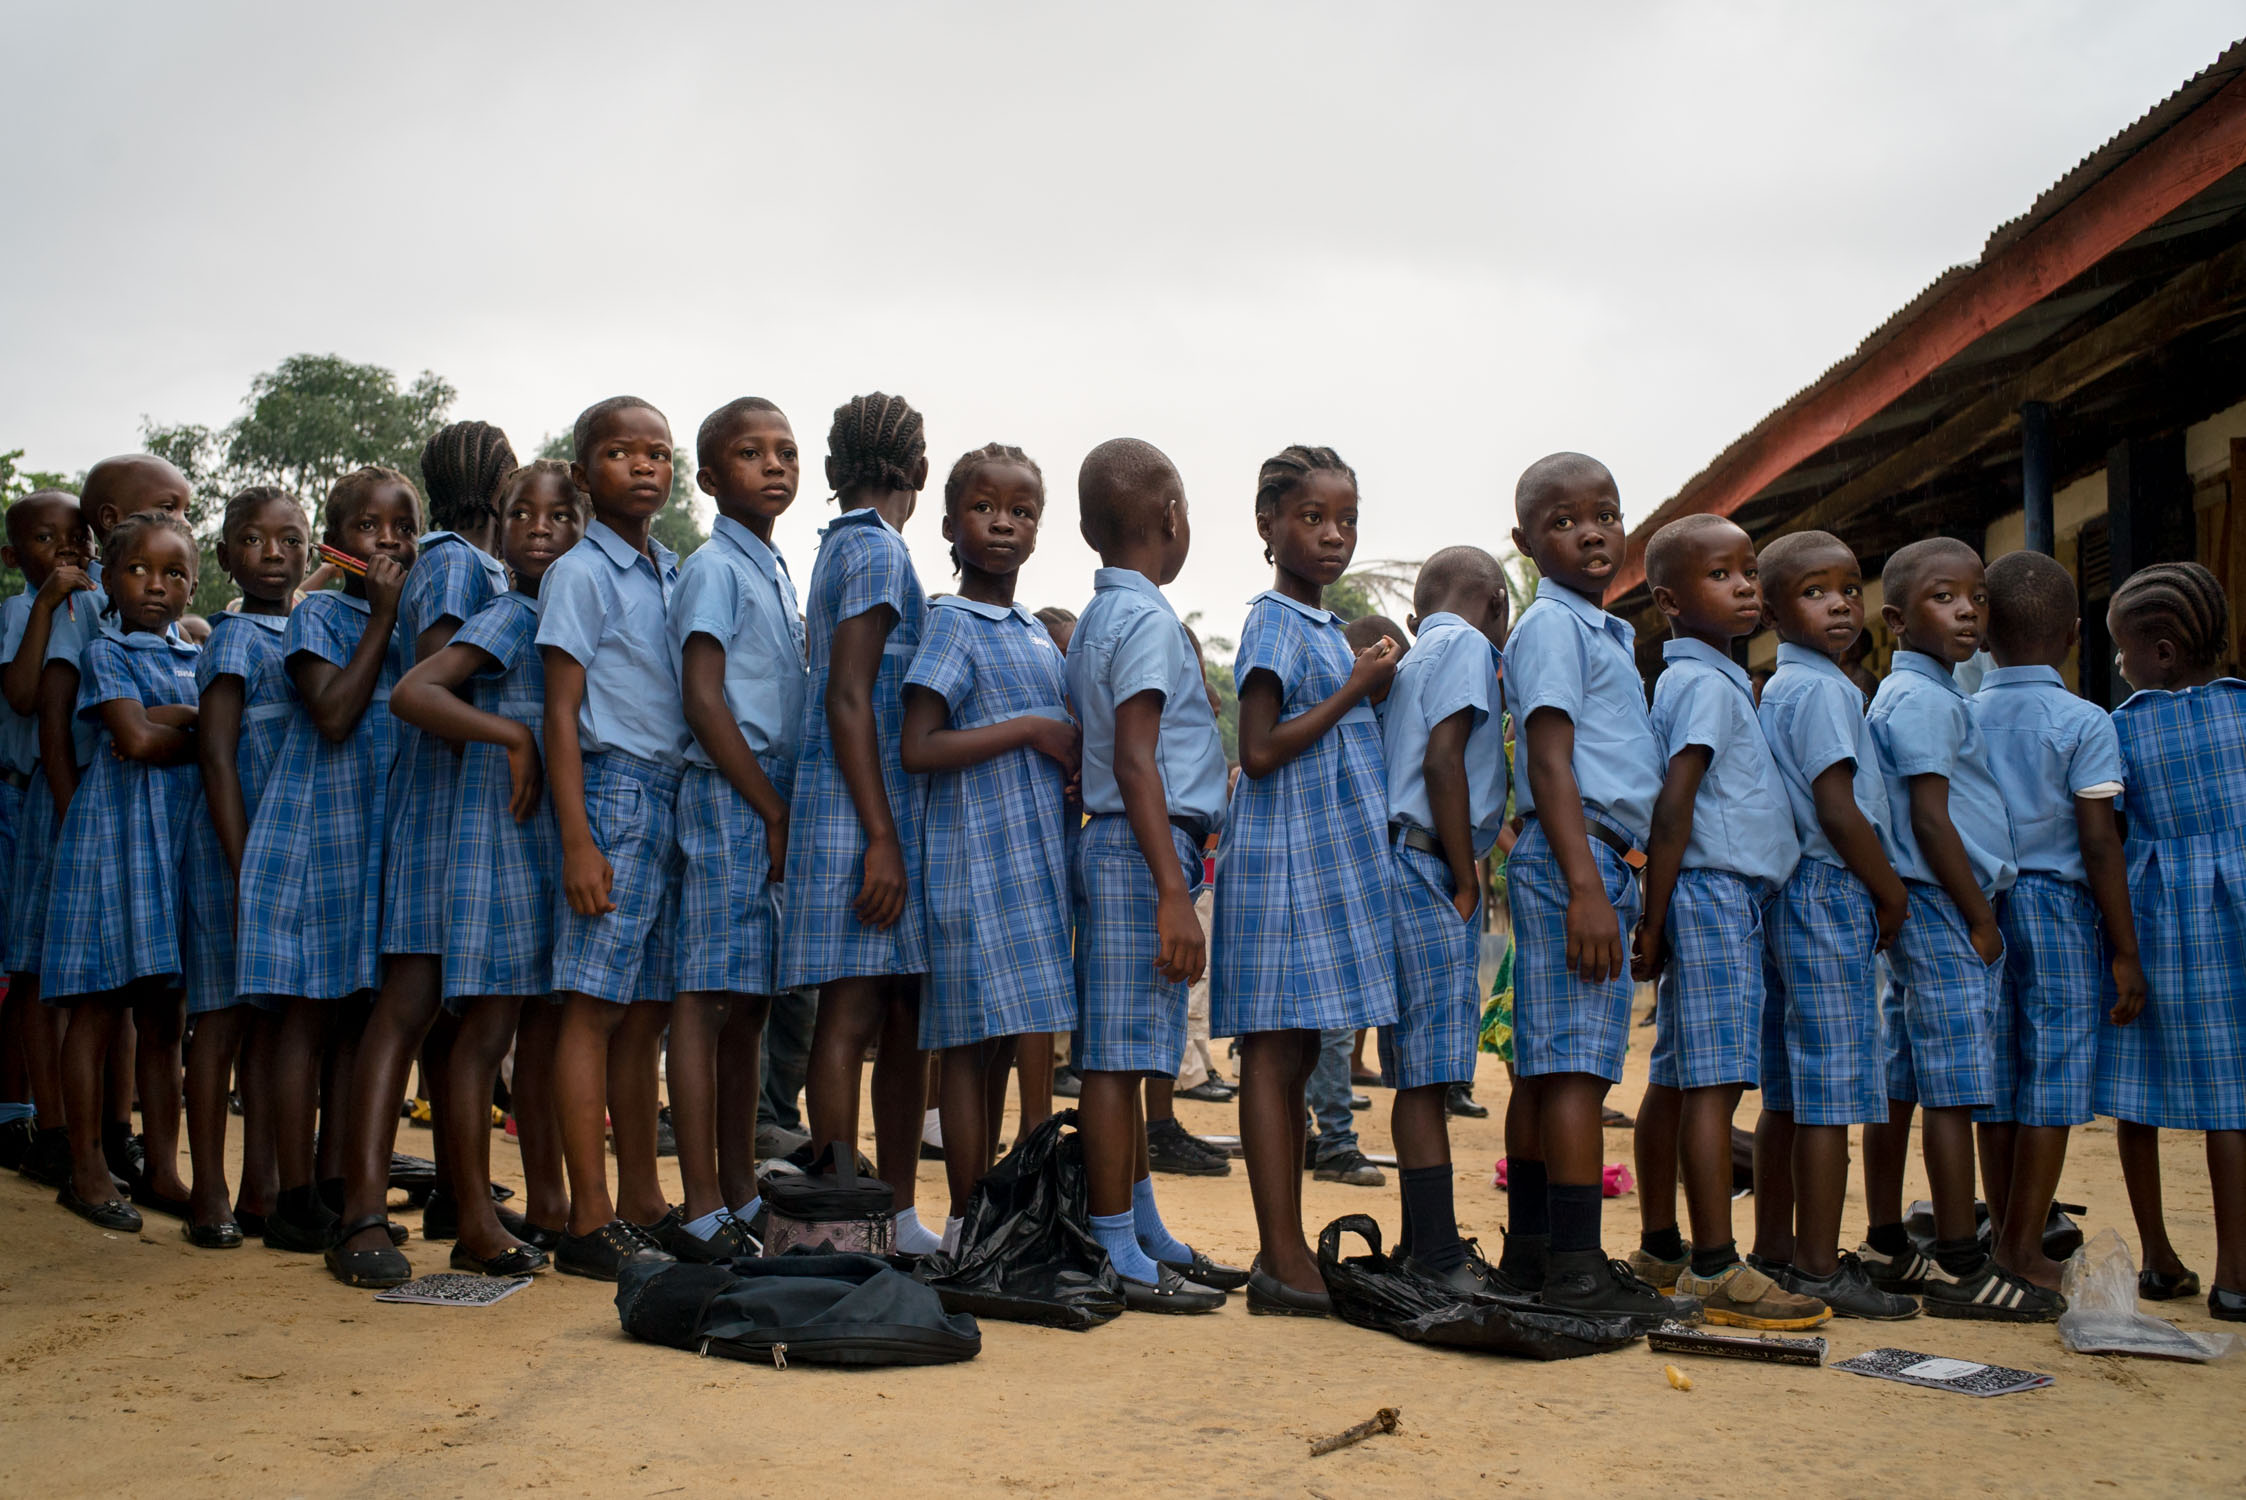  Children line up in the hallway of a recently opened Bridge school in TK Plantation, a rural community outside of Monrovia. September 23, 2016. TK Plantation, Monrovia, Liberia. 